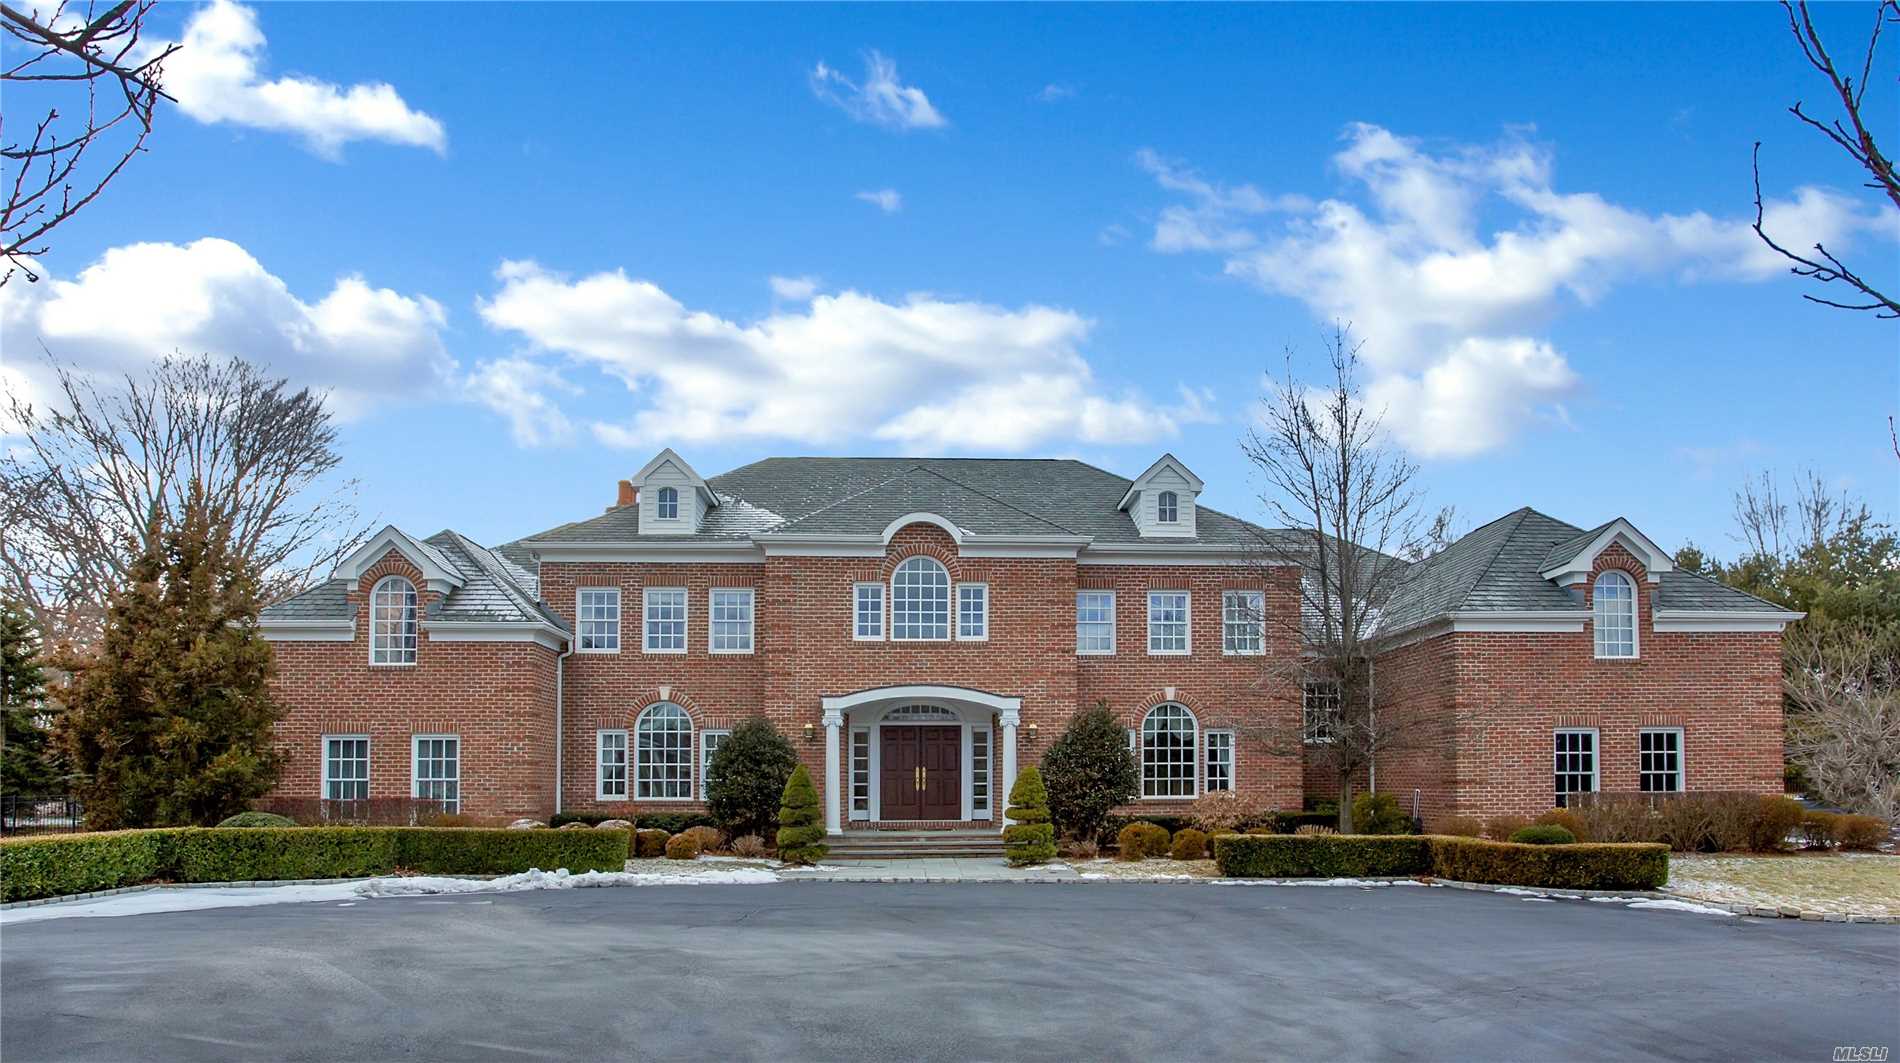 Built 2002 On 4 Magnificent Acres On One Of Old Westbury&rsquo;s Most Desirable Gated Cul-De-Sac&rsquo;s Sits This Spectacular Brick Georgian Manor Residence. This Stunning 7, 000 Sf. 5 Br 5.5 Bath Residence Offers Unparalleled Attention To Architectural Detail & Craftsmanship As Well As 2 Master Br Suites, 2-Story Eh, 3 Car Gar, Fin Bsmnt And Ig-Heated Gunite Pool & Spa. Jericho Sd